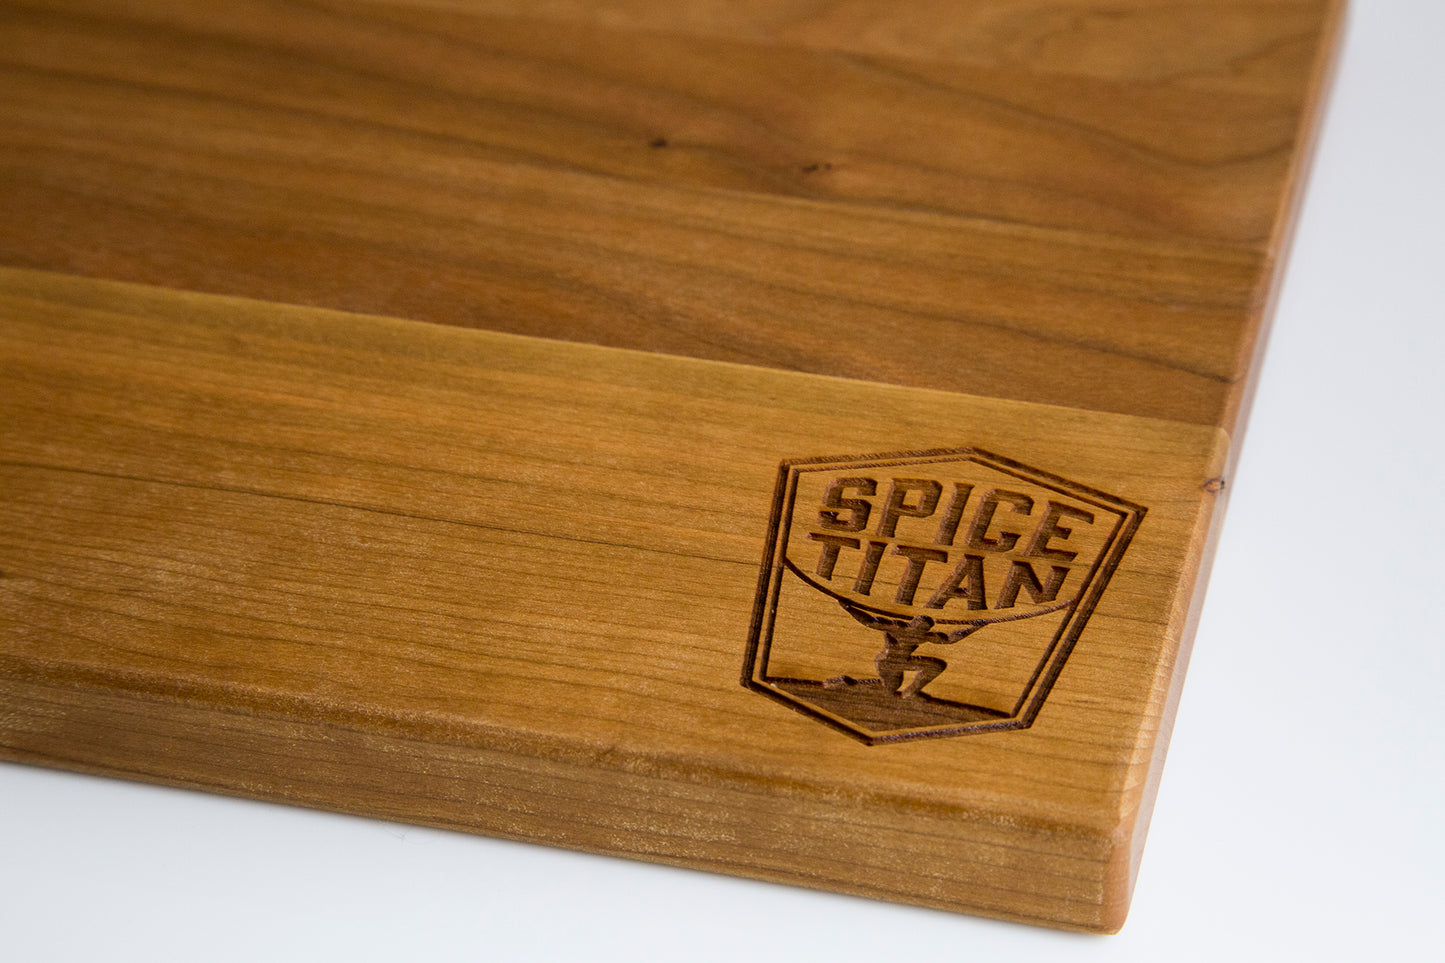 Cutting Board Made From Cherry Wood Spicetitan.com